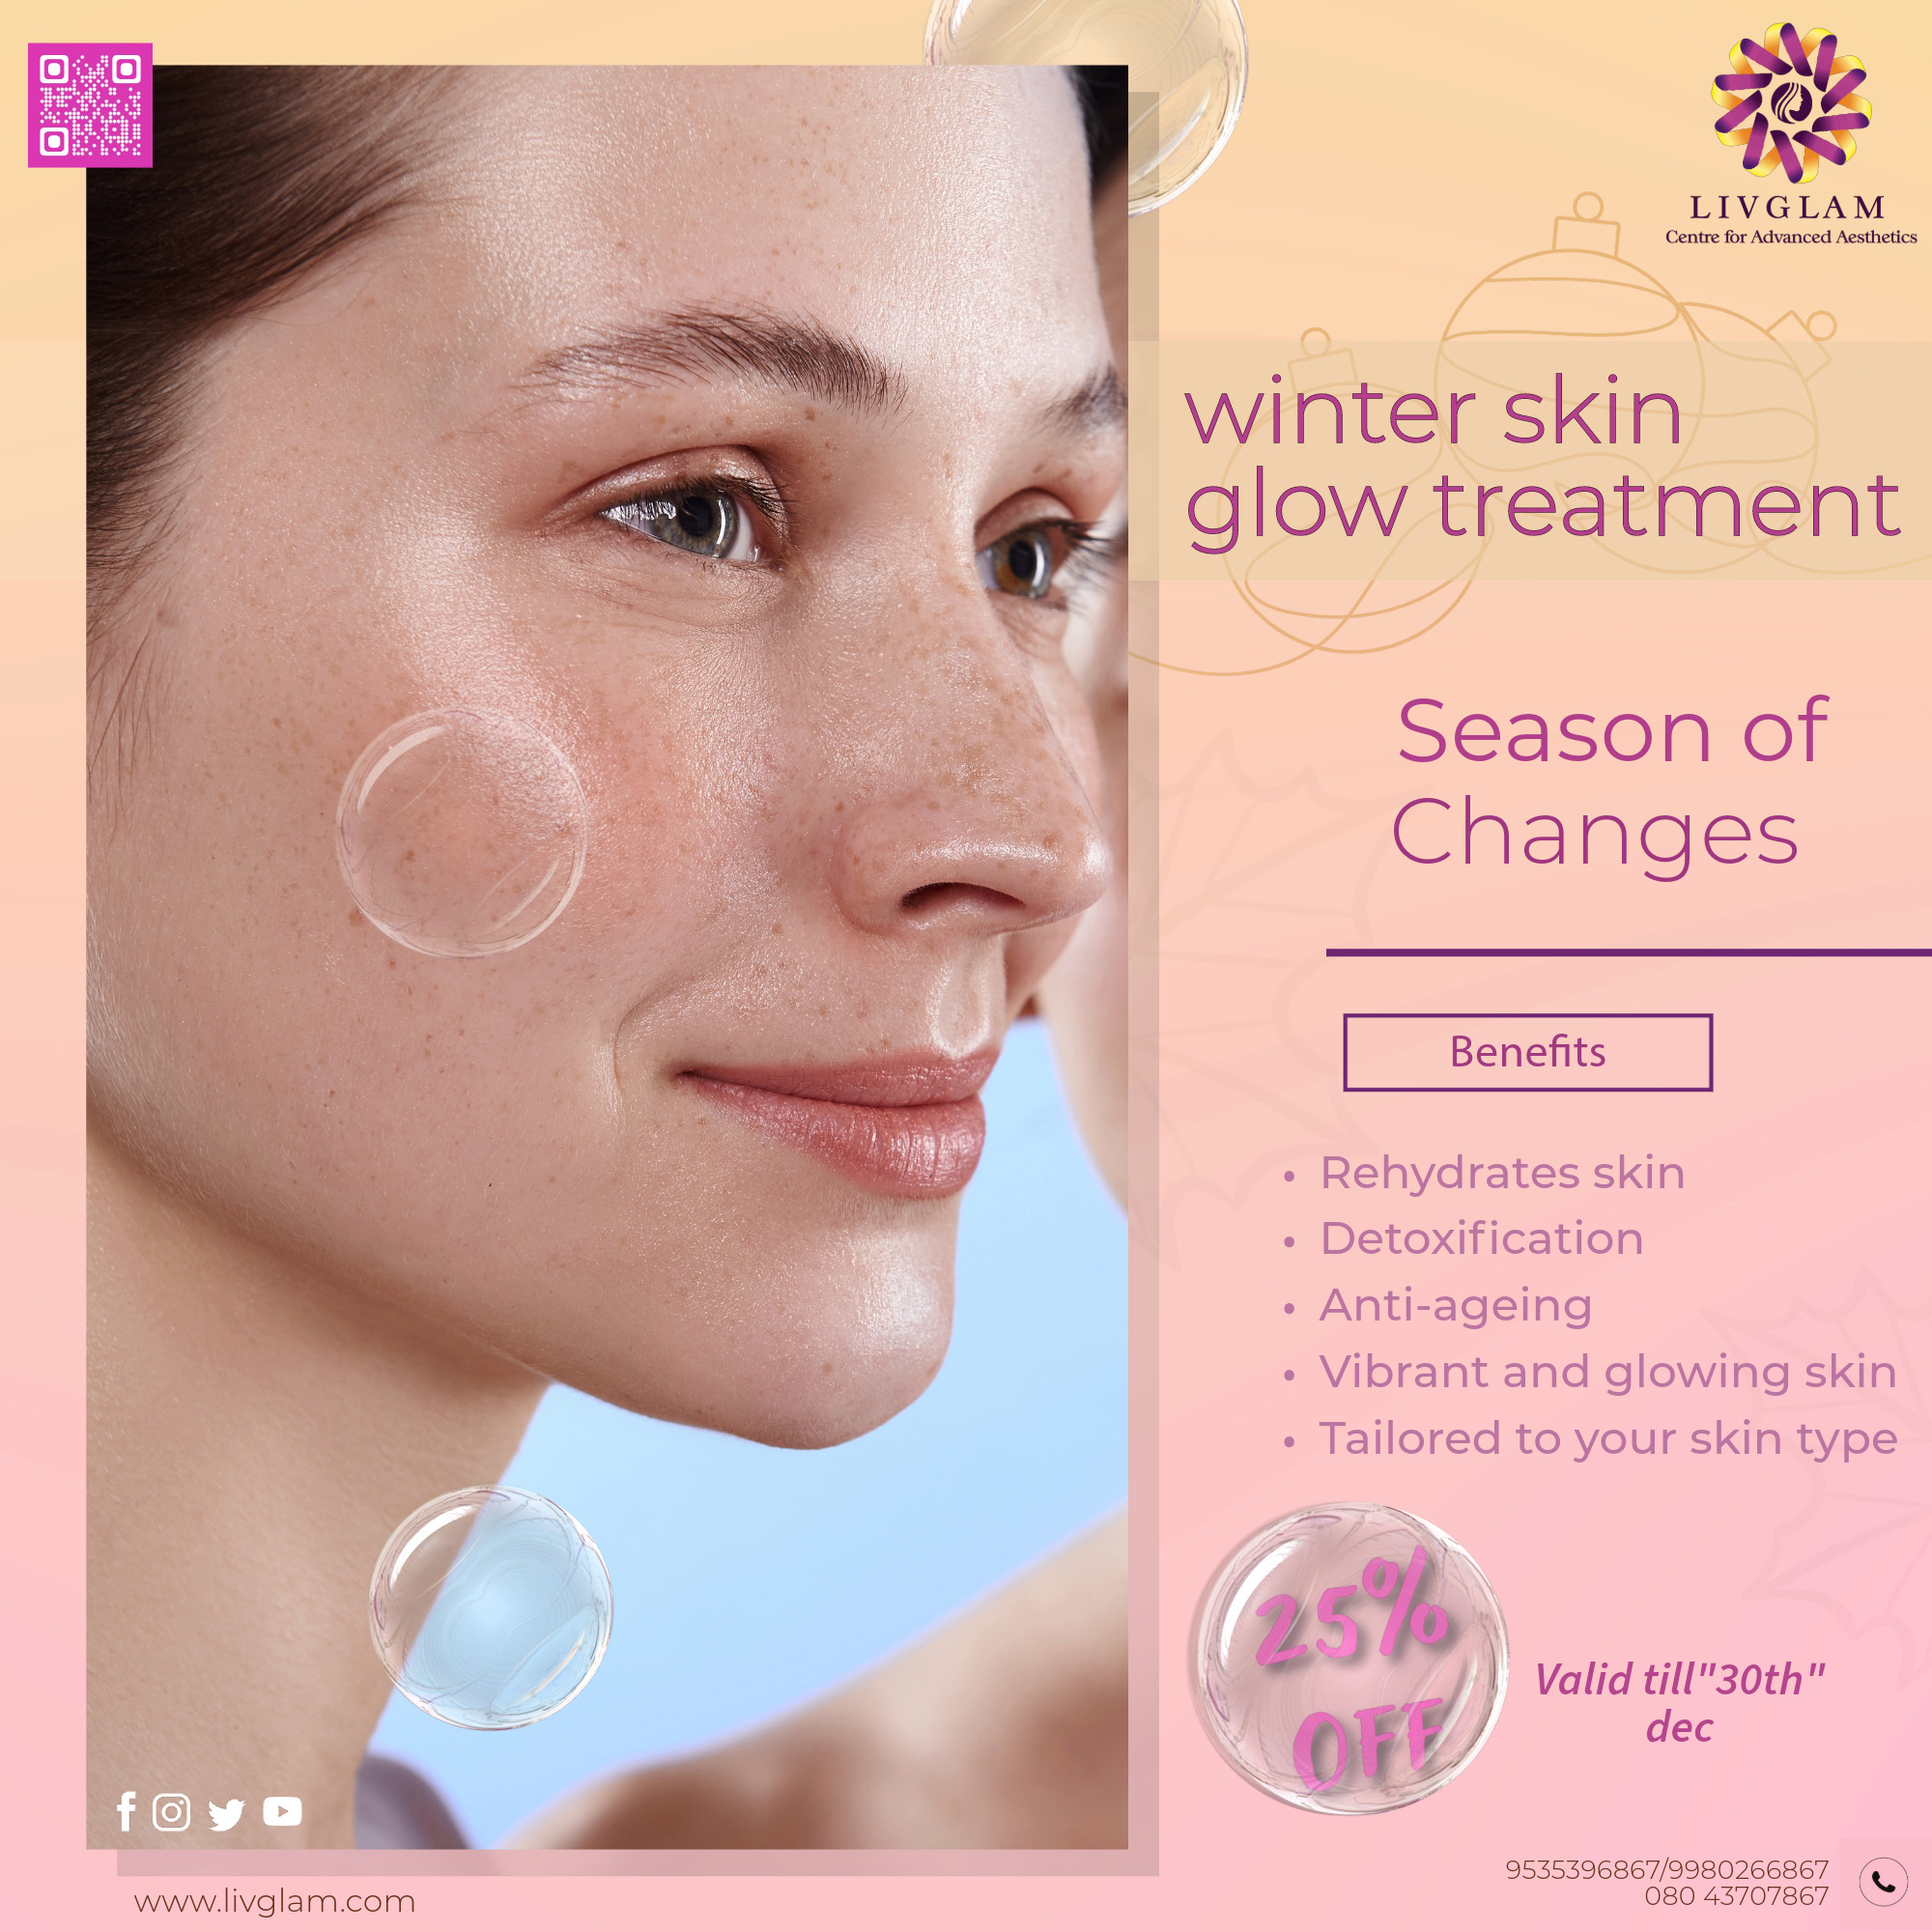 Winter Skincare Tips - Combat Dryness and Glow All Season